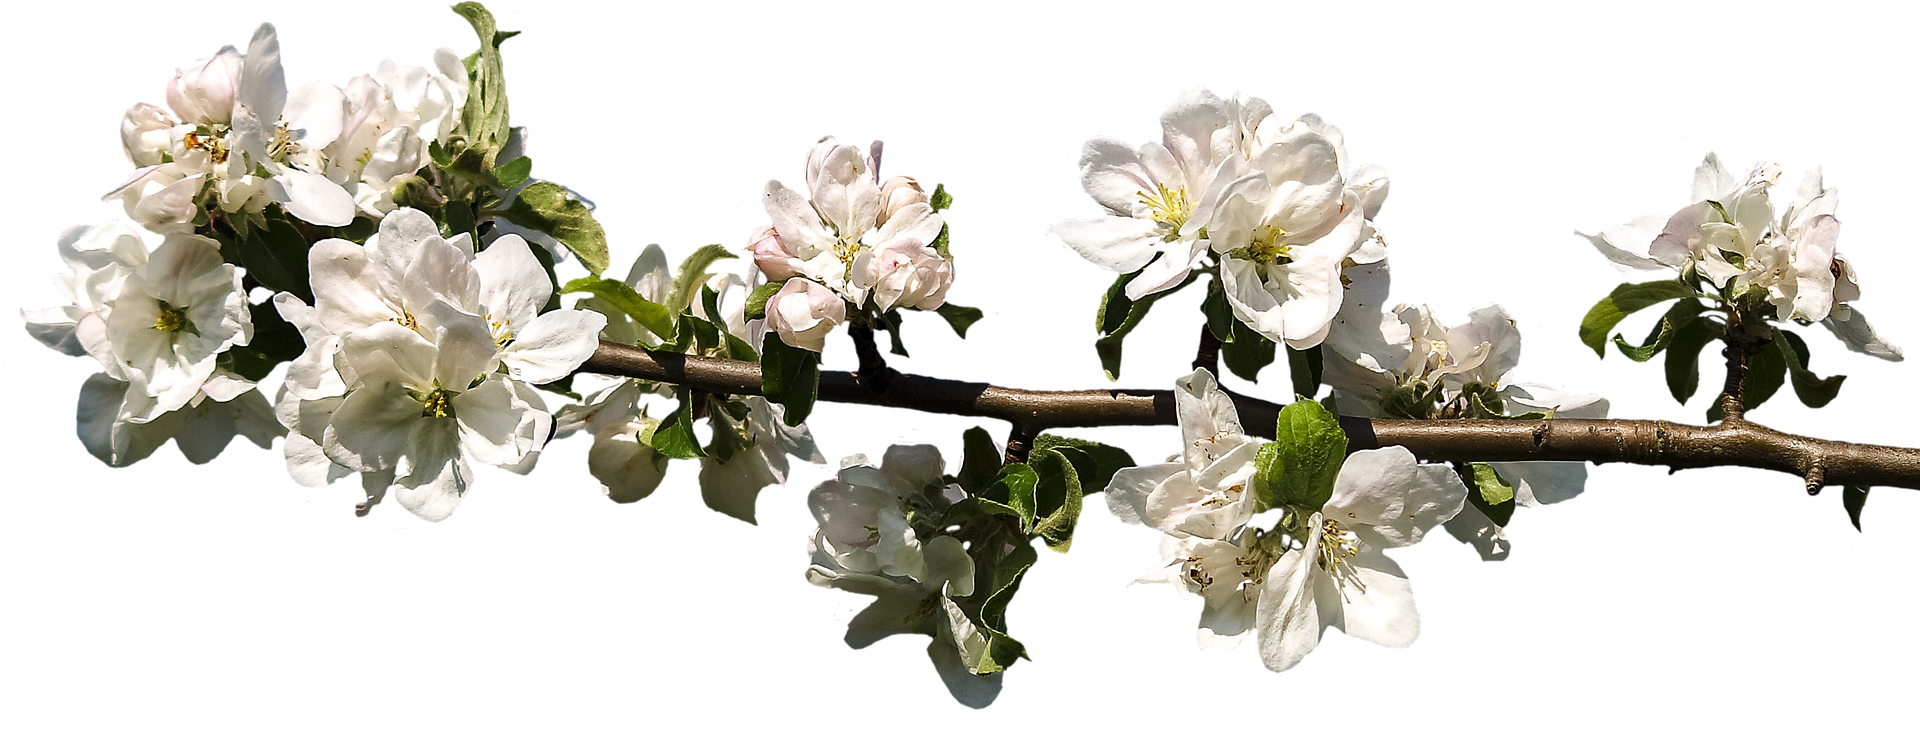 A Branch With White Flowers